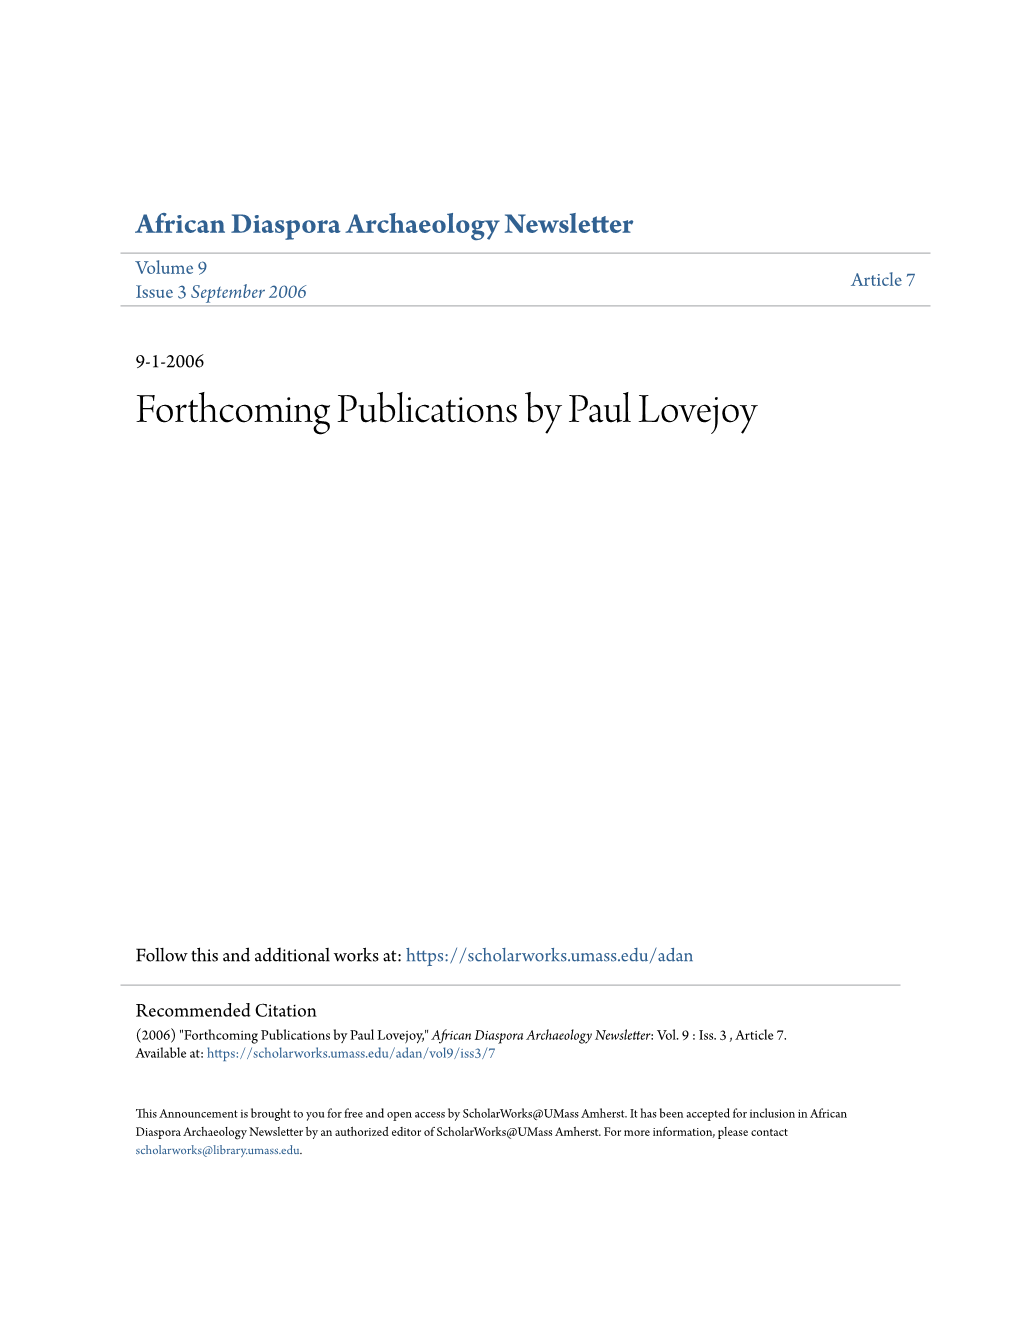 Forthcoming Publications by Paul Lovejoy